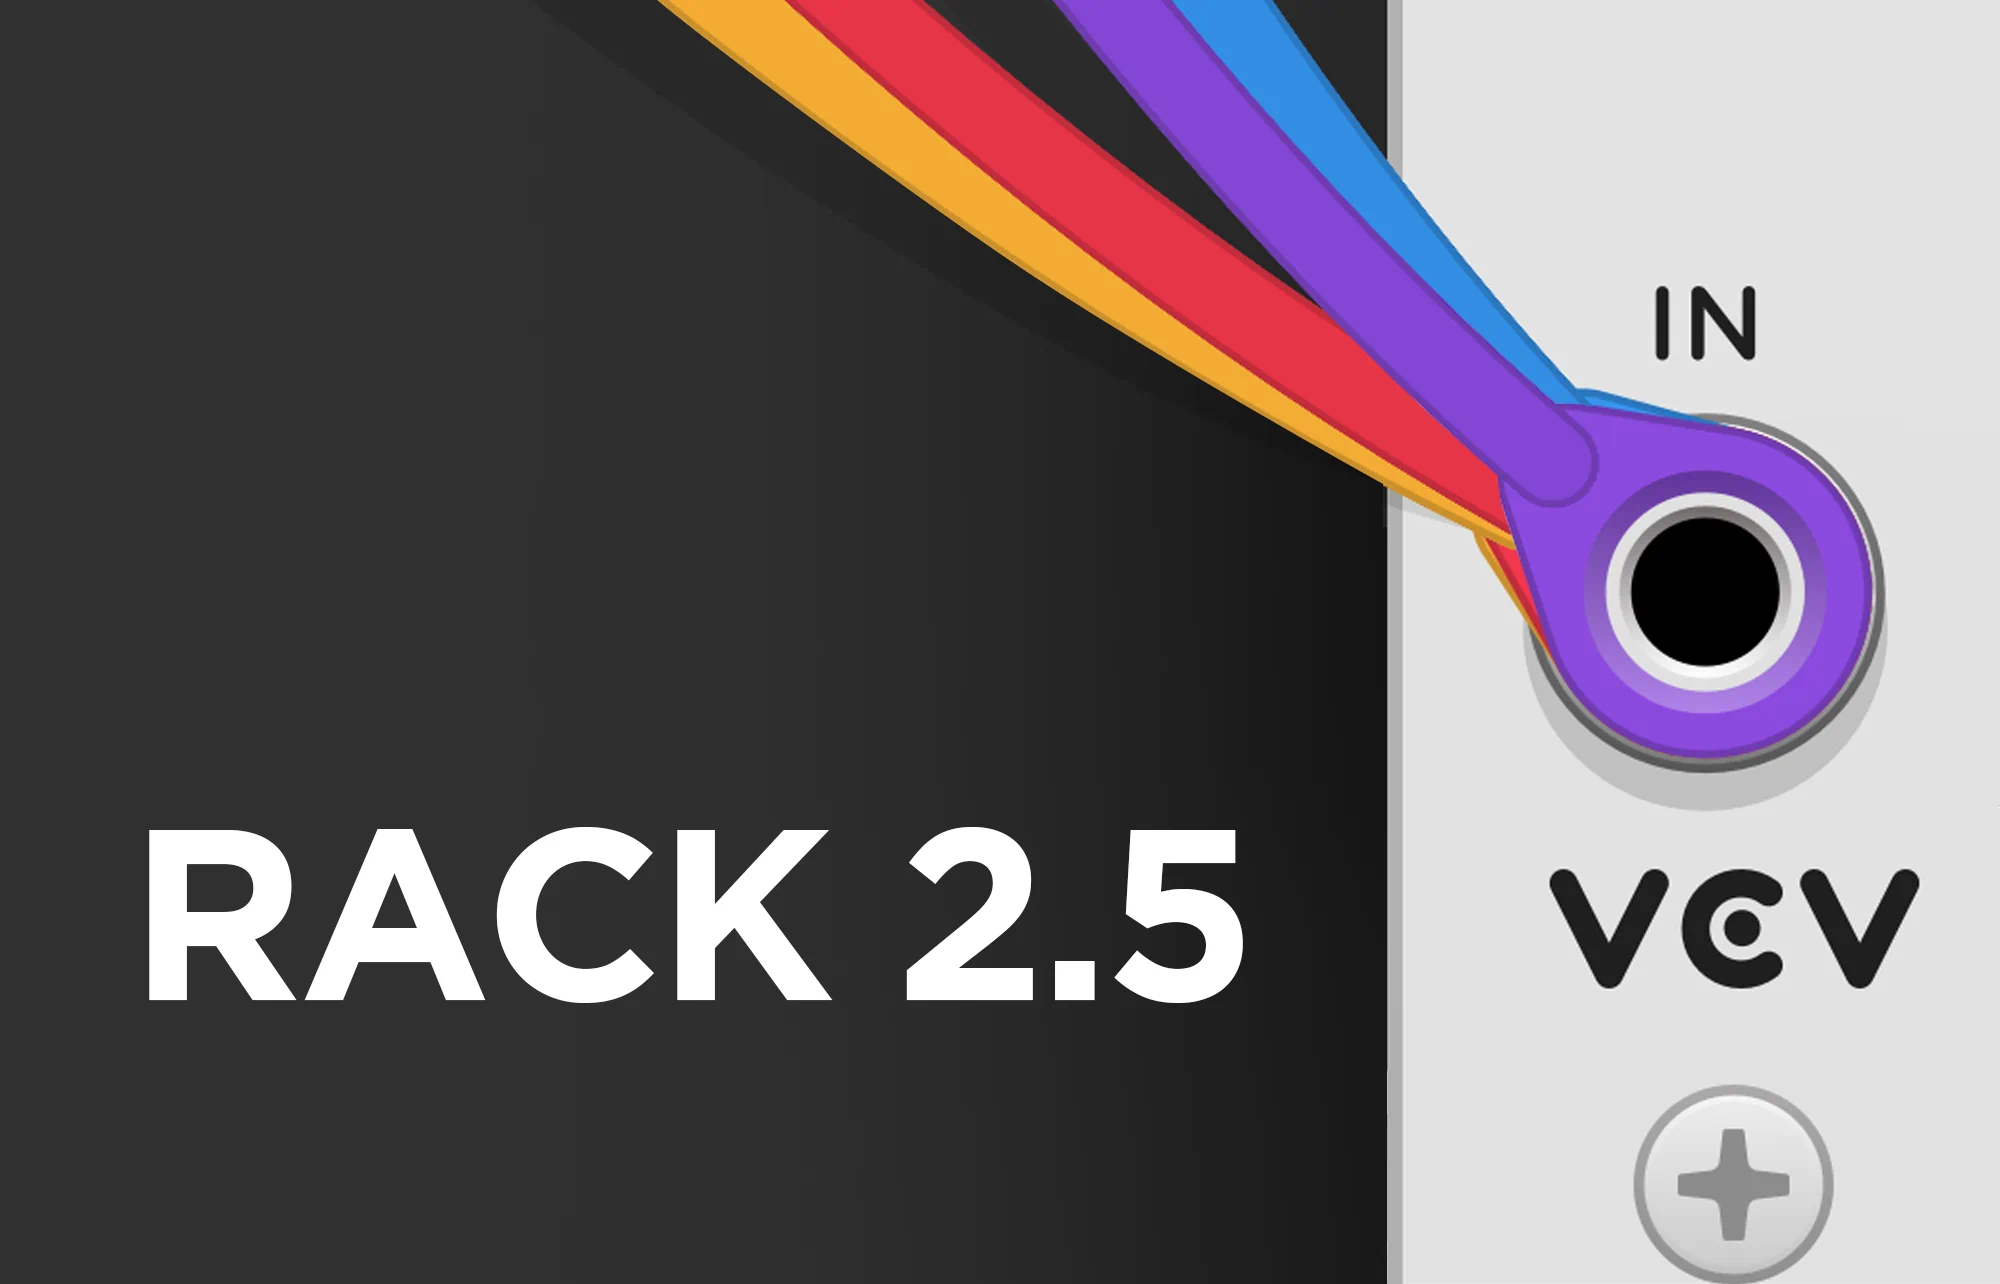 VCV Rack 2.5 stackable cables